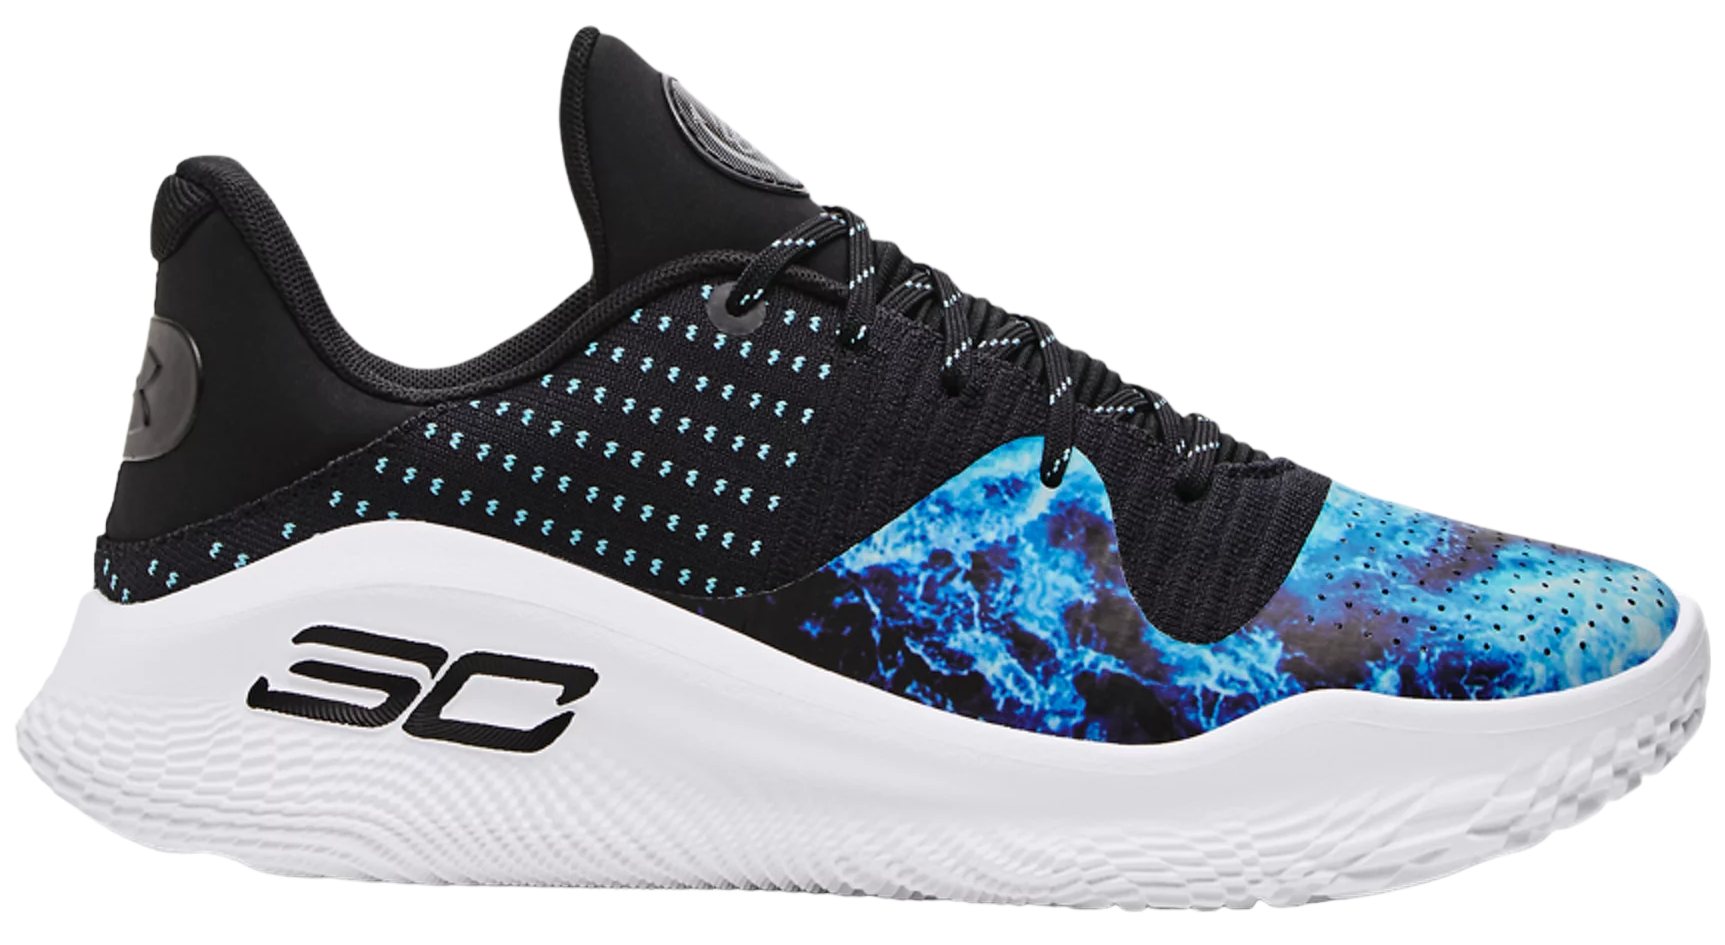 Basketball shoes Under Armour CURRY 4 LOW FLOTRO DW